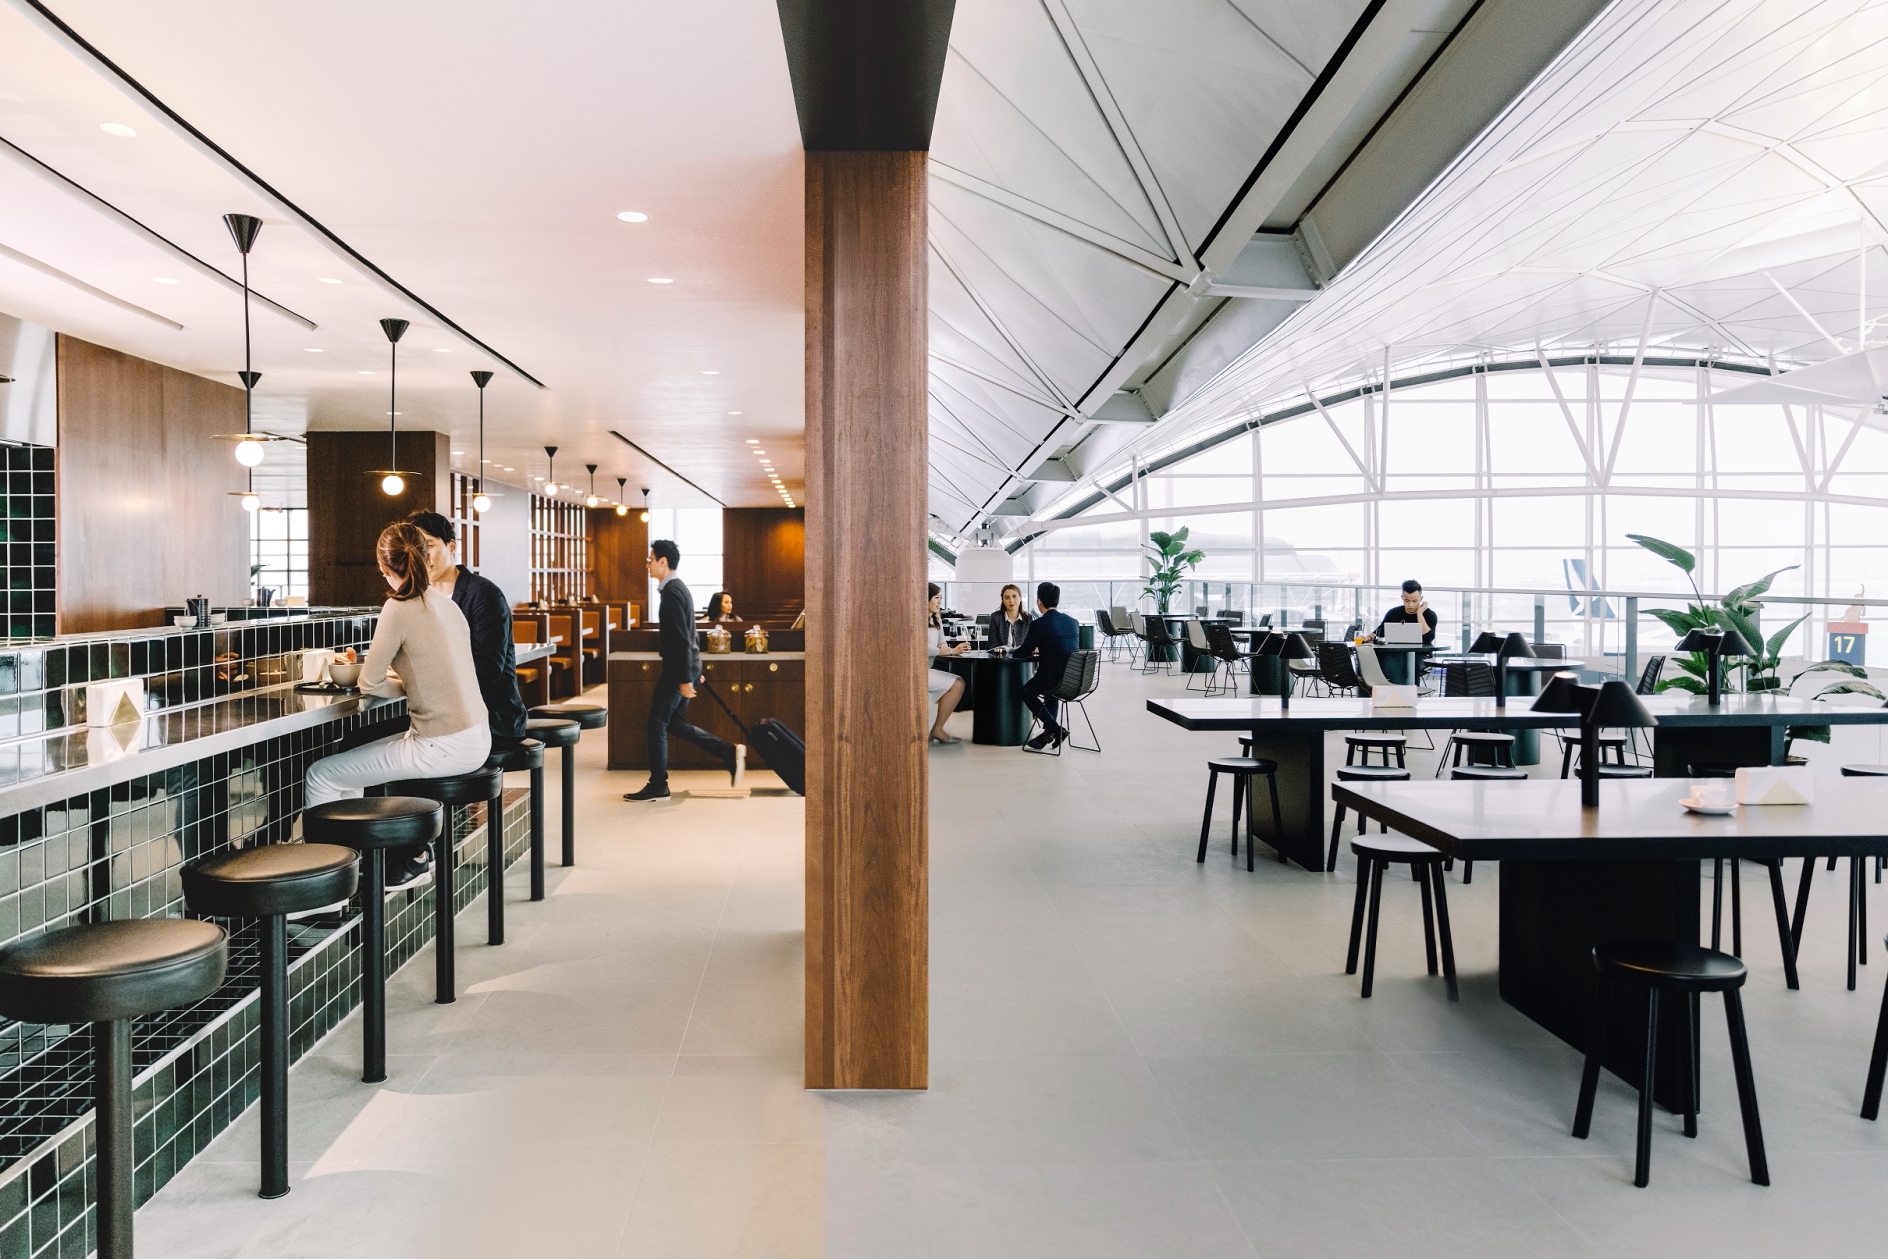 Cathay Pacific has reopened The Deck lounge at HKIA. Click to enlarge.